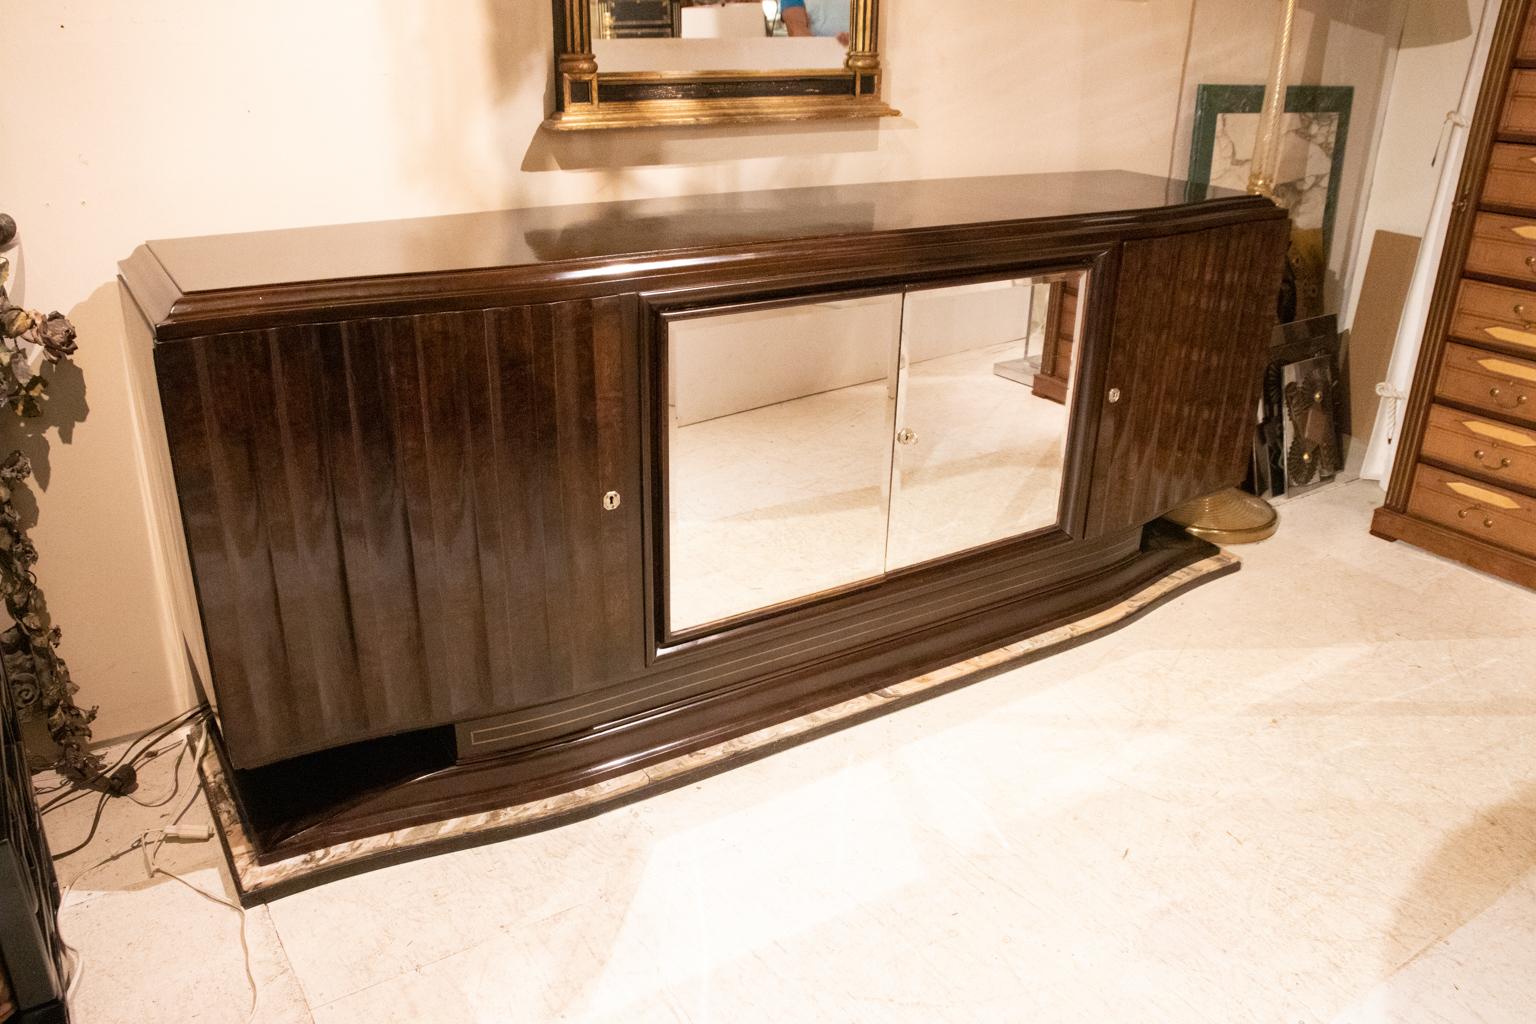 French art moderne credenza of highly polished rosewood with a pair of mirror doors flanked on each side by a polished wood door, circa 1930s. The credenza tapers to a base of wood and marble. The top is also highly polished. The interior of this